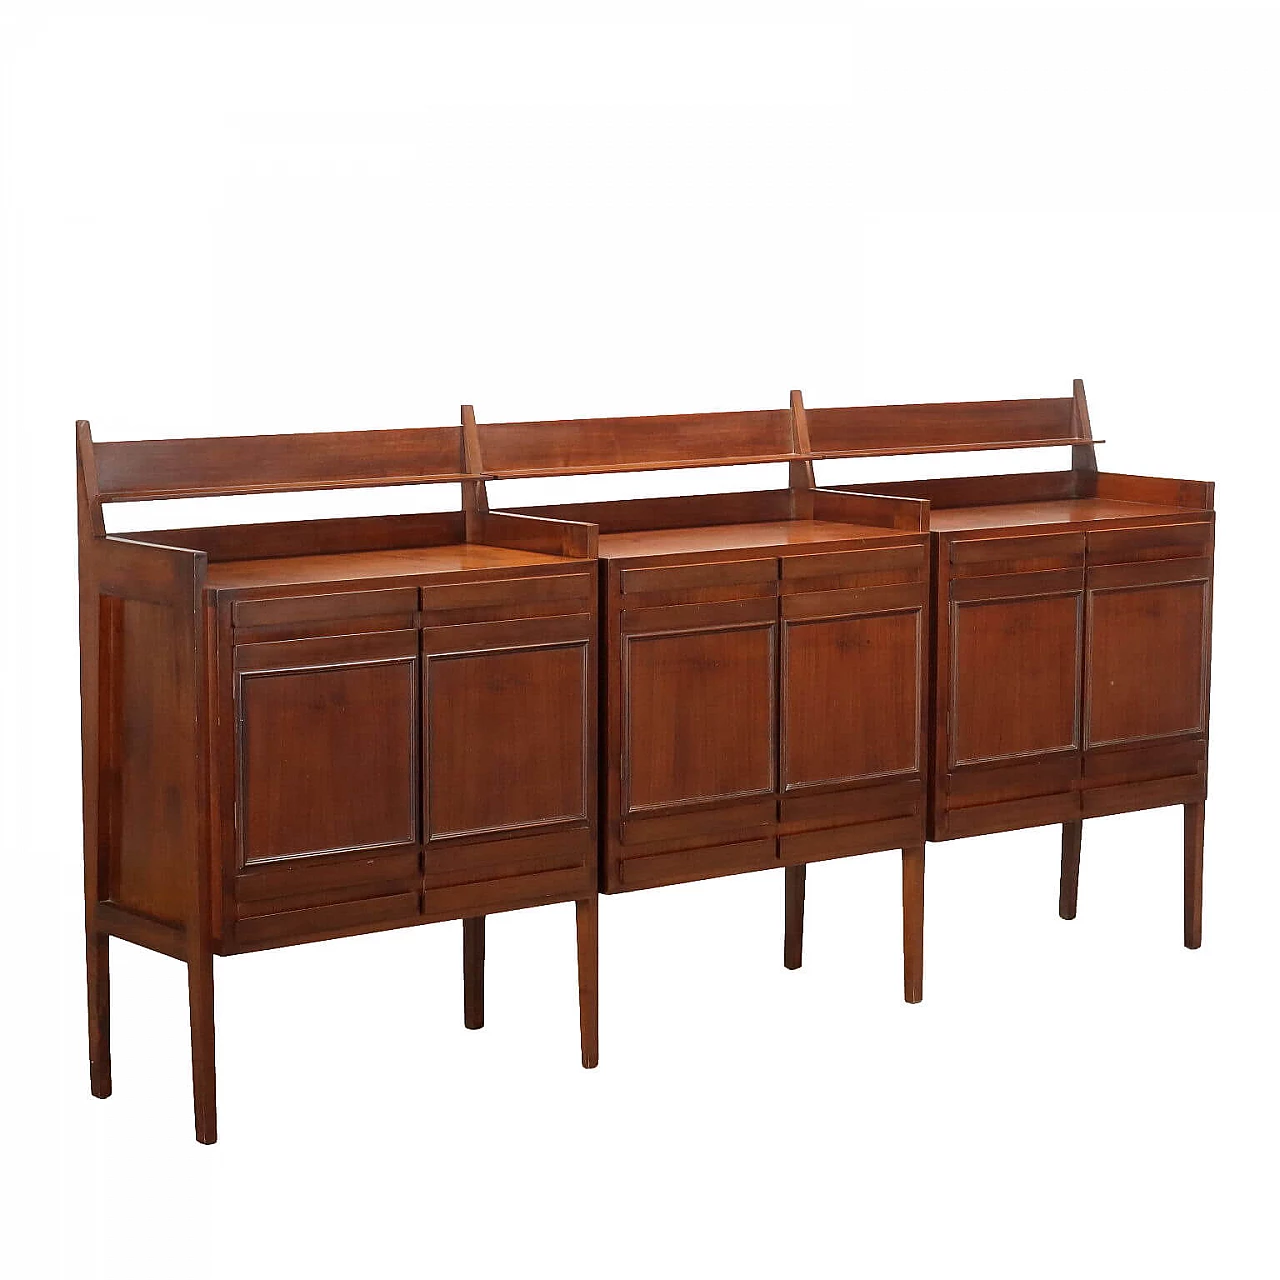 Walnut sideboard with drawers, shelf and hinged doors, 1960s 1